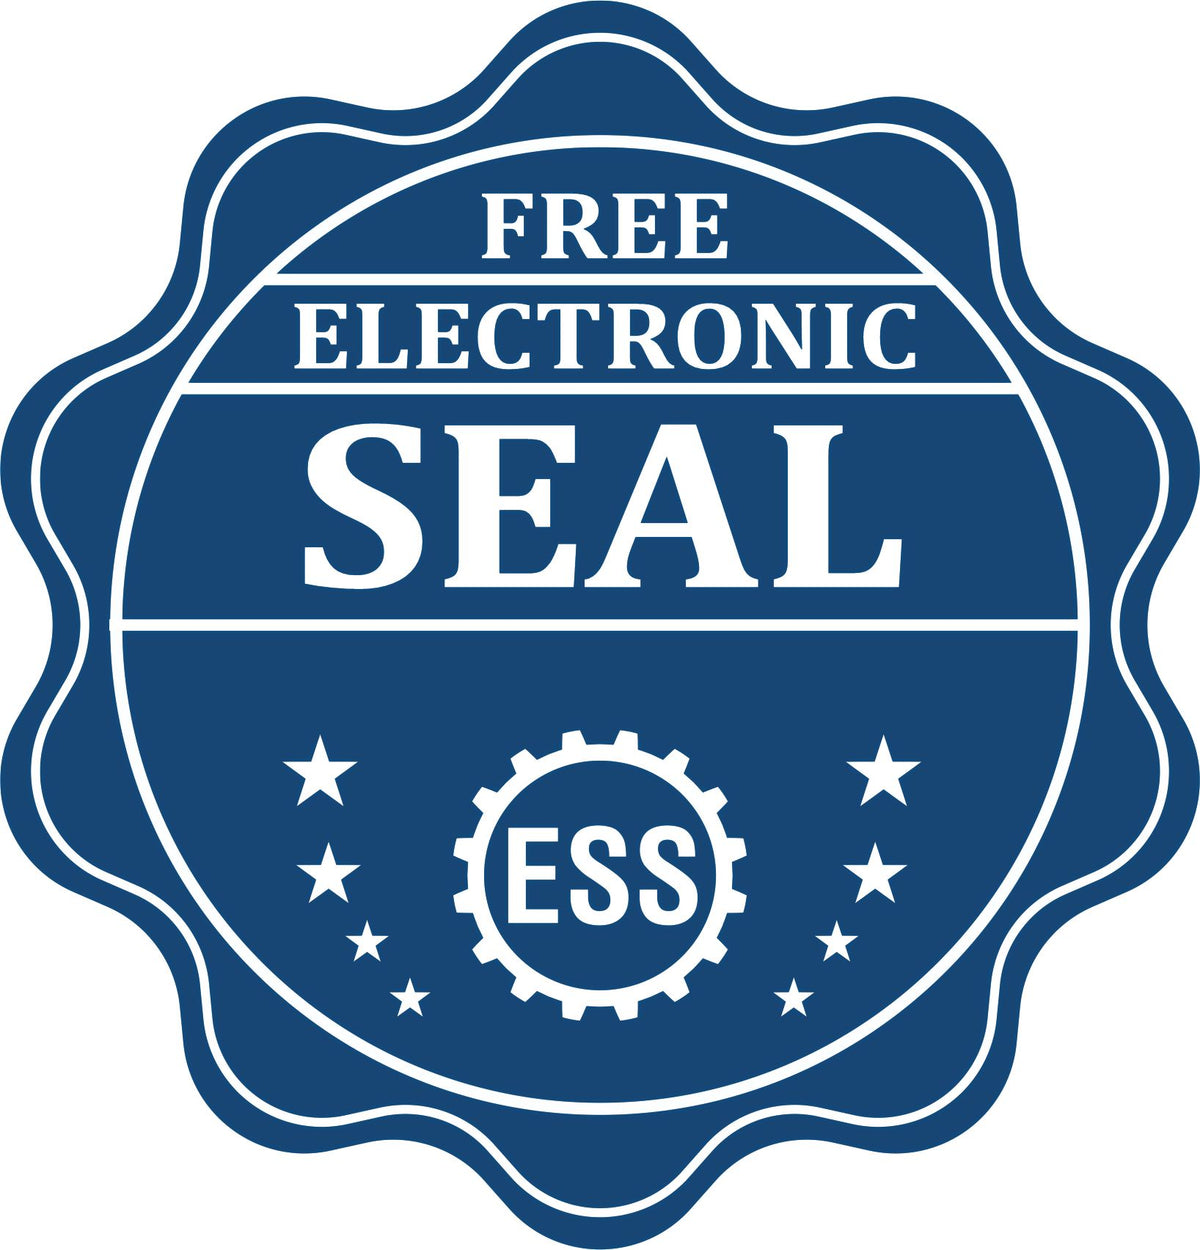 A badge showing a free electronic seal for the Soft Pocket South Carolina Landscape Architect Embosser with stars and the ESS gear on the emblem.